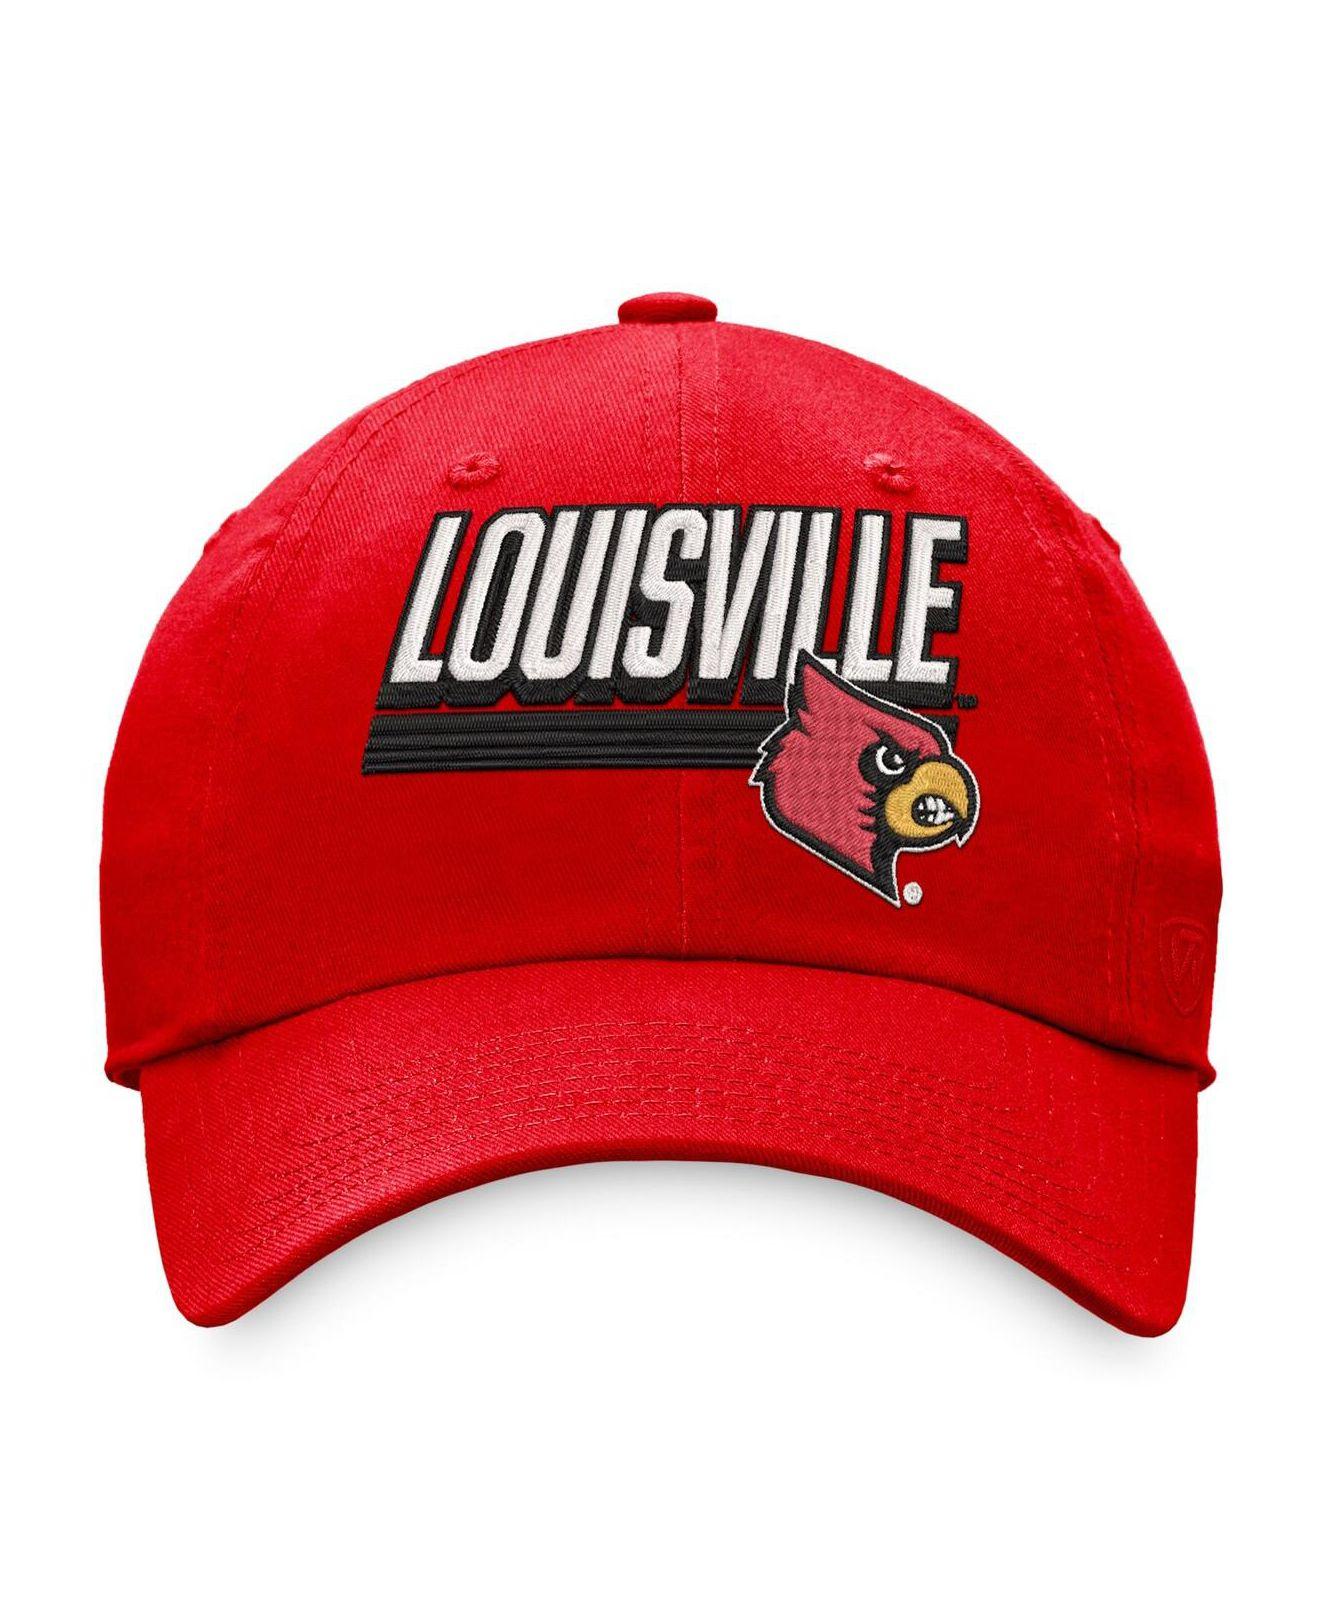 Louisville Cardinals Top of the World Slice Adjustable Hat - Charcoal